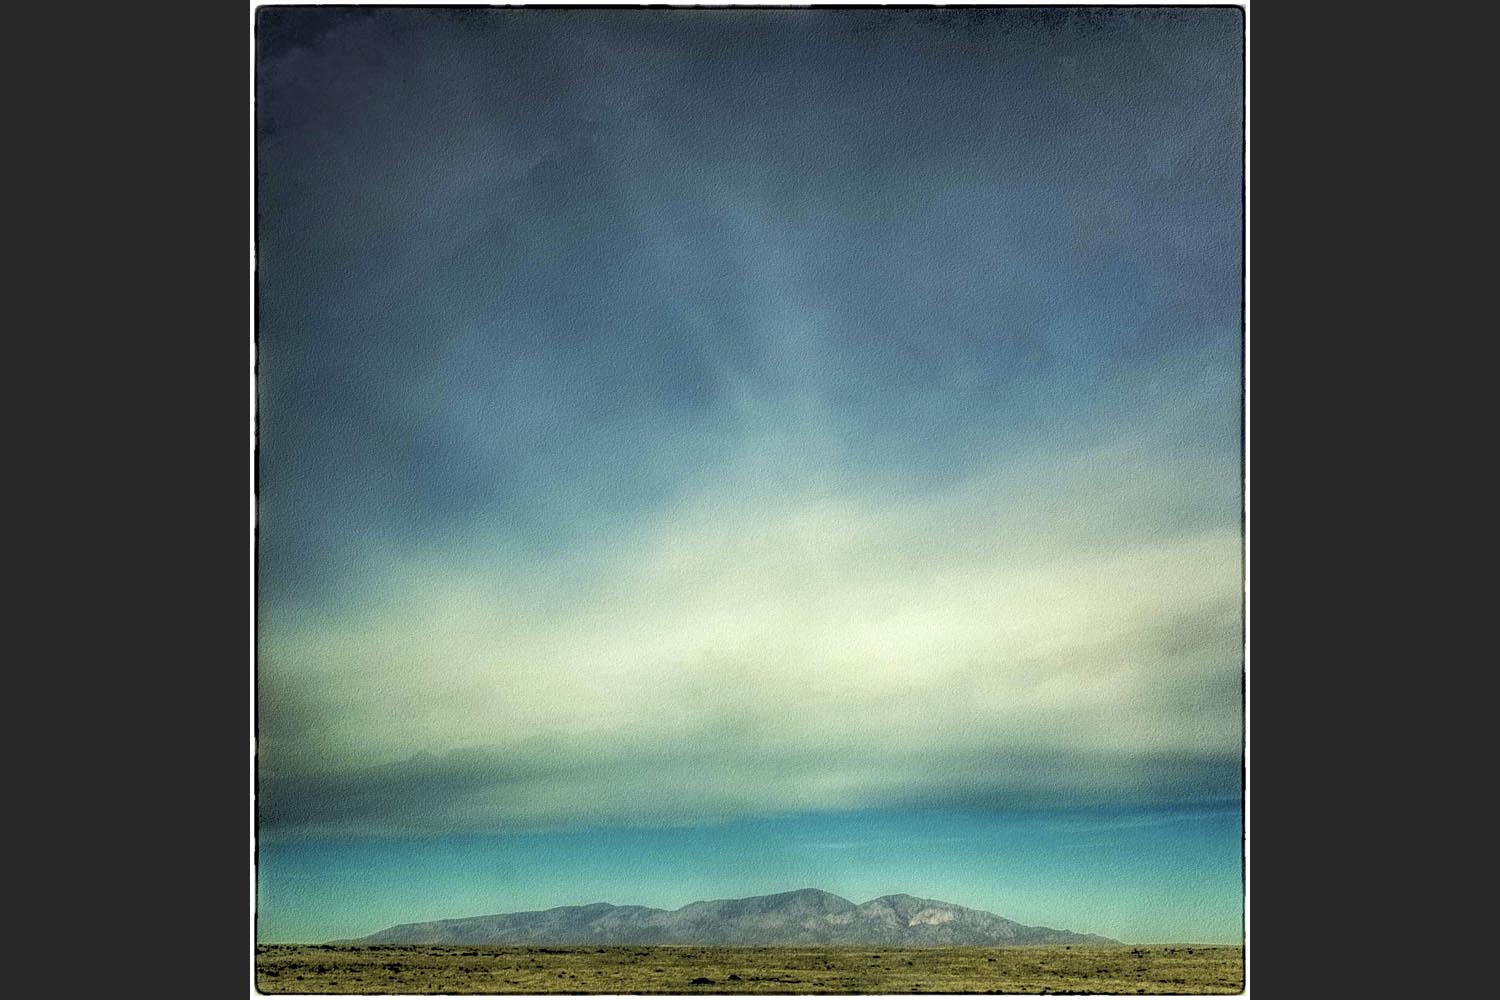 Thelma Pilley: Clouds Over Capitan - Southern New Mexico